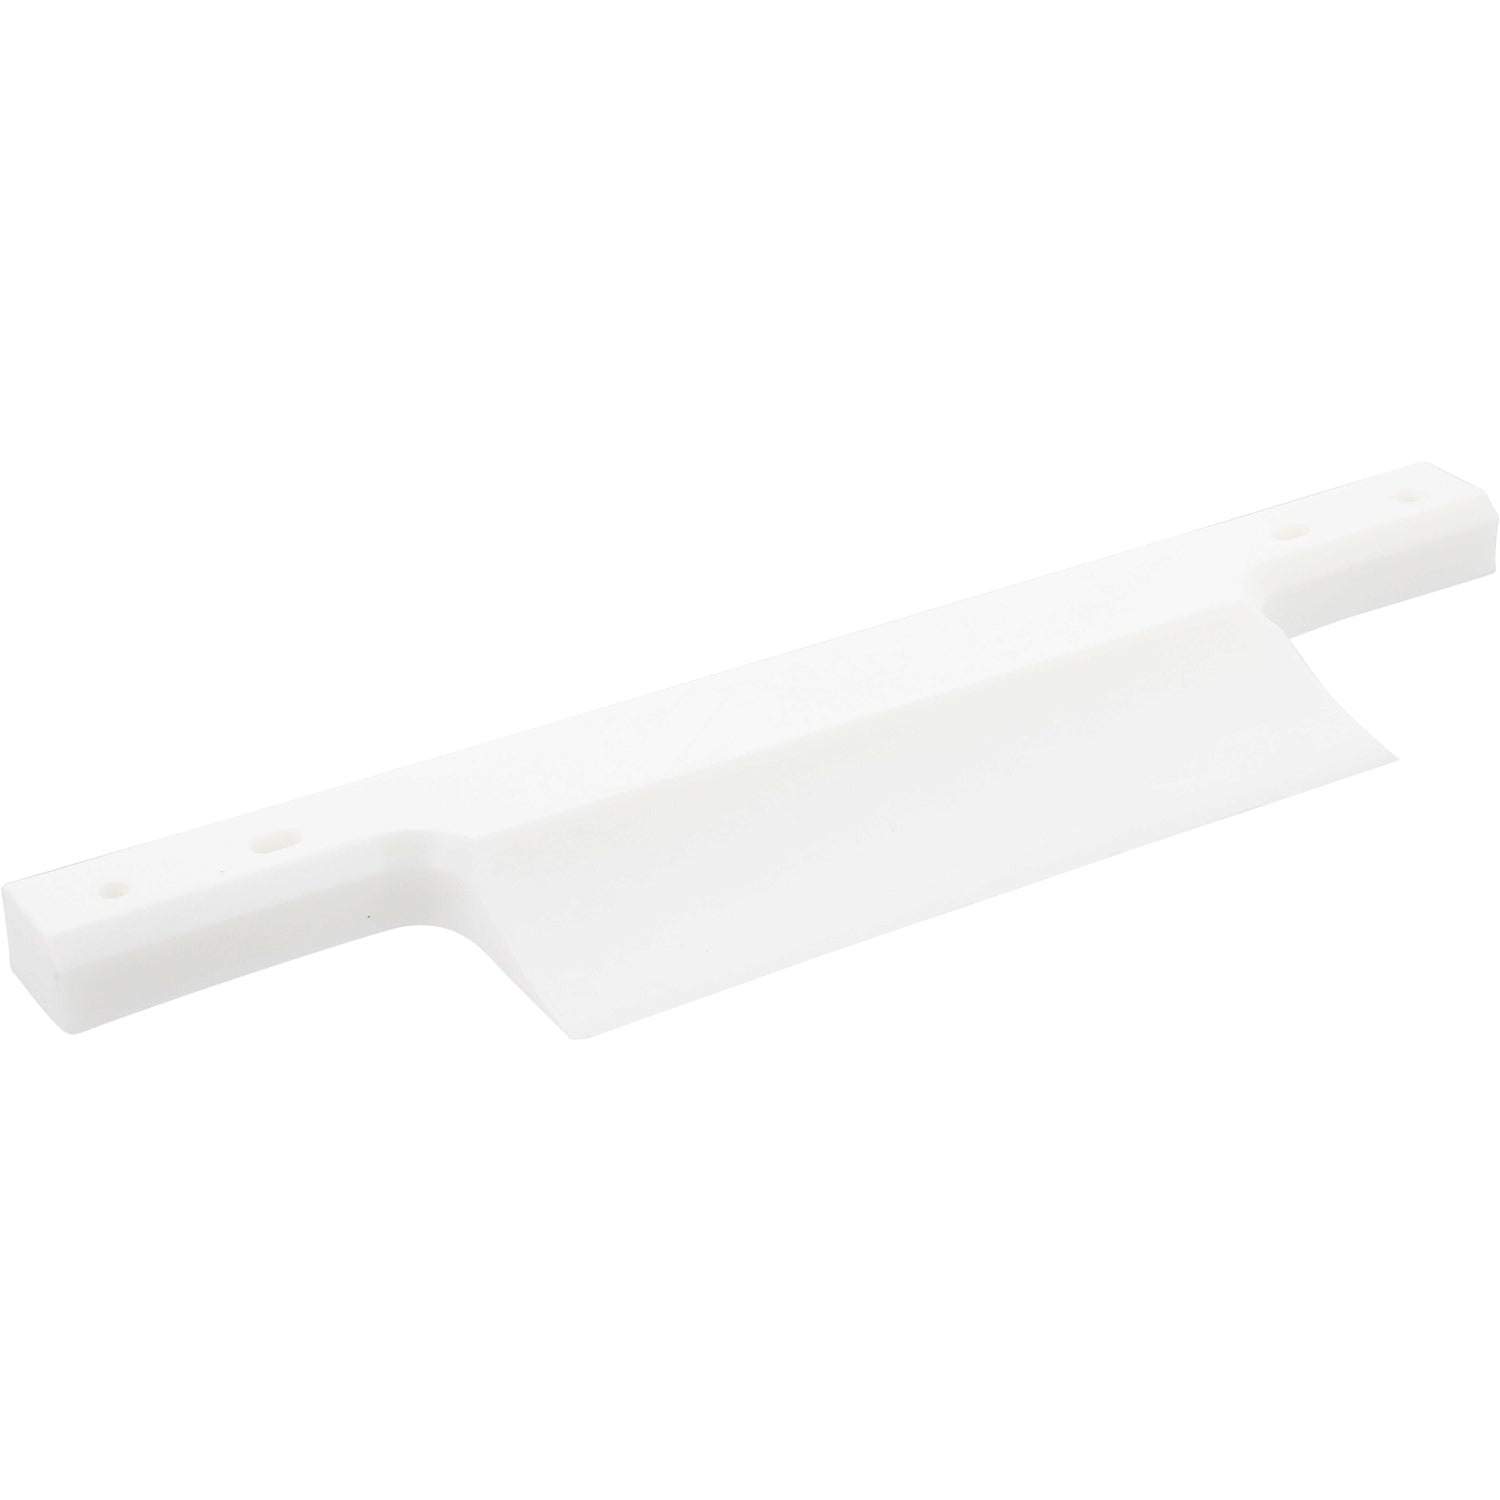 White plastic dead plate with tapered sharp edge and mounting through holes shown on white background. 